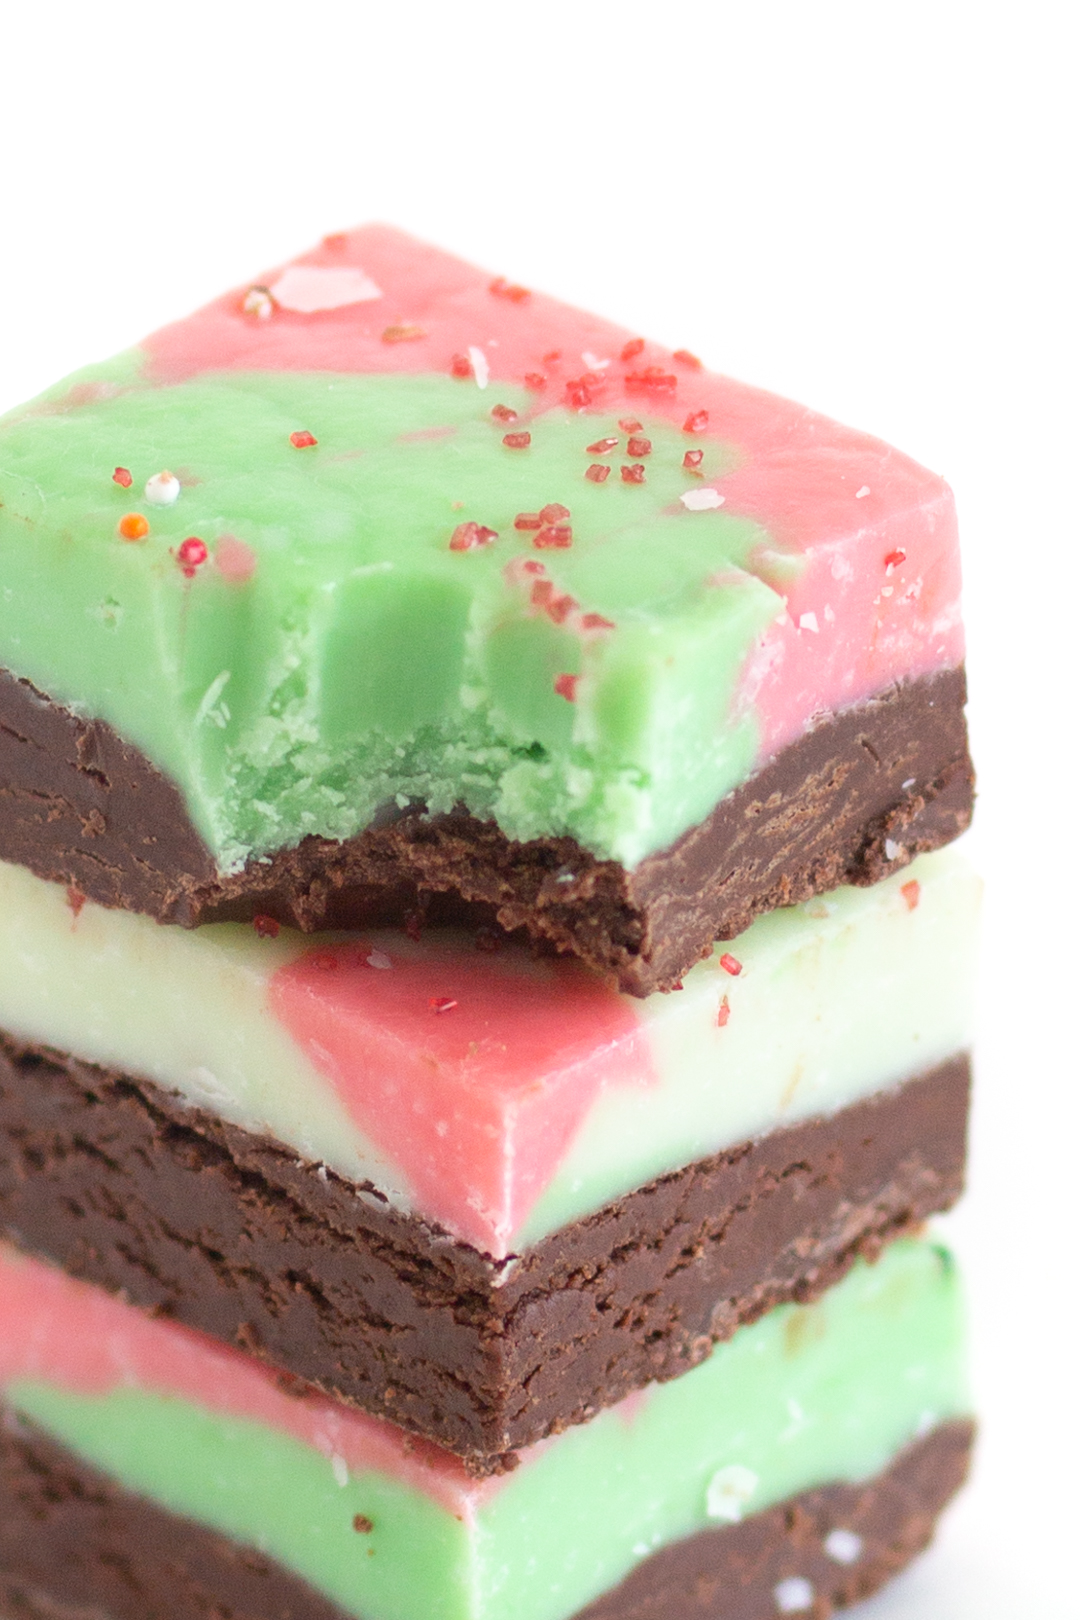 squares of multi colored fudge stacked on top of each other. Top square with a bite taken out if it. toped with red crystal sprinkles.